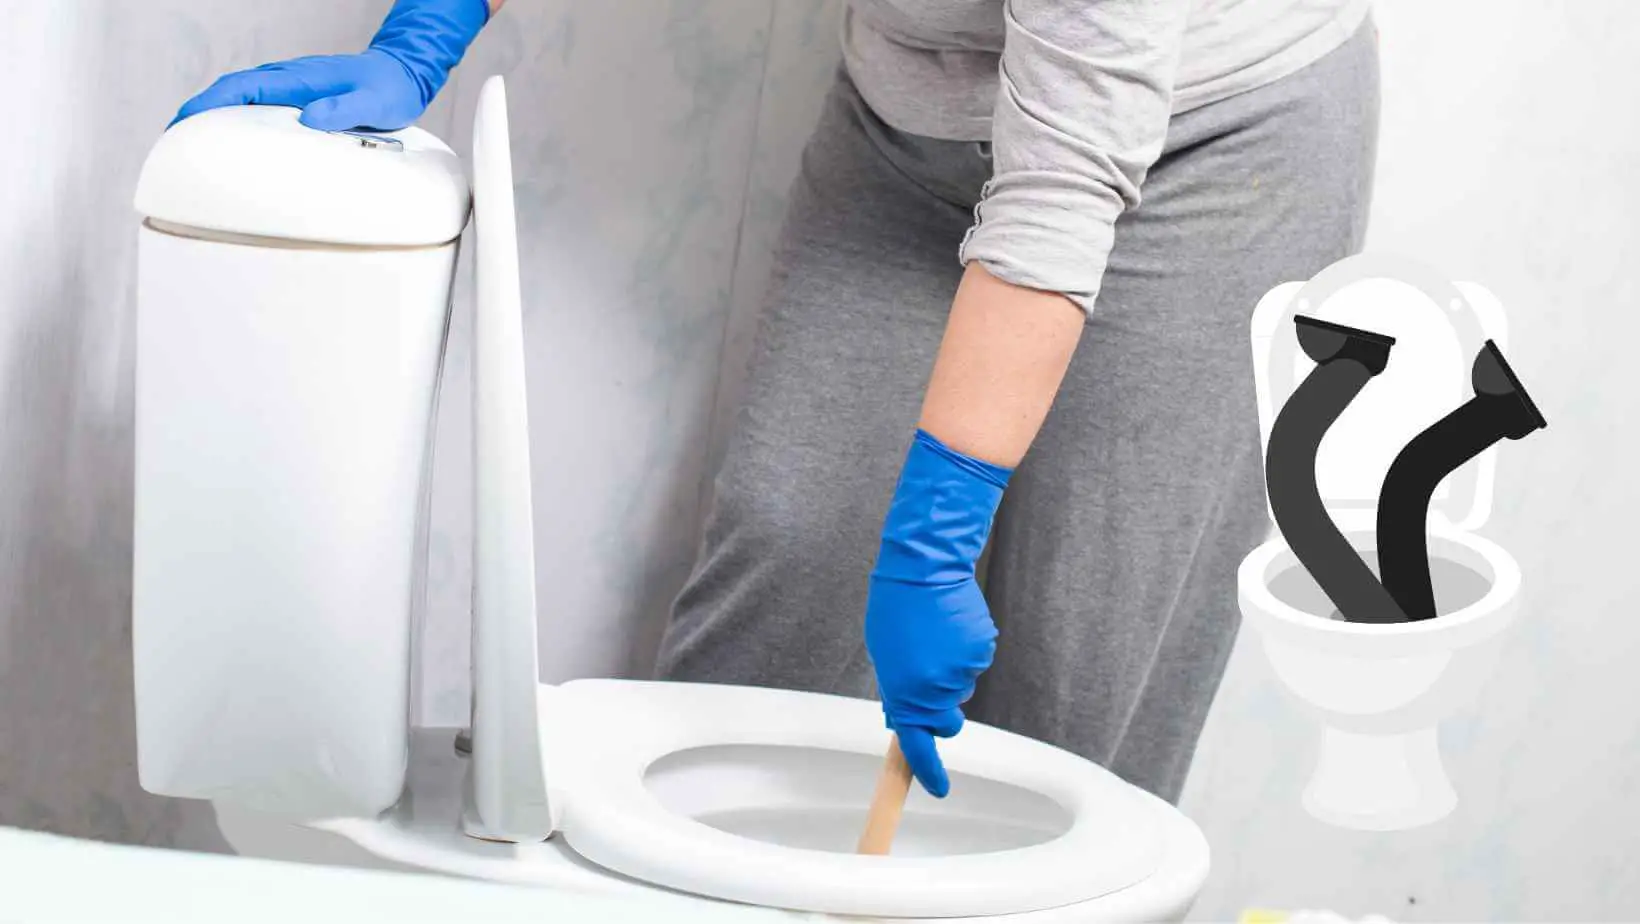 How to remove object stuck in toilet